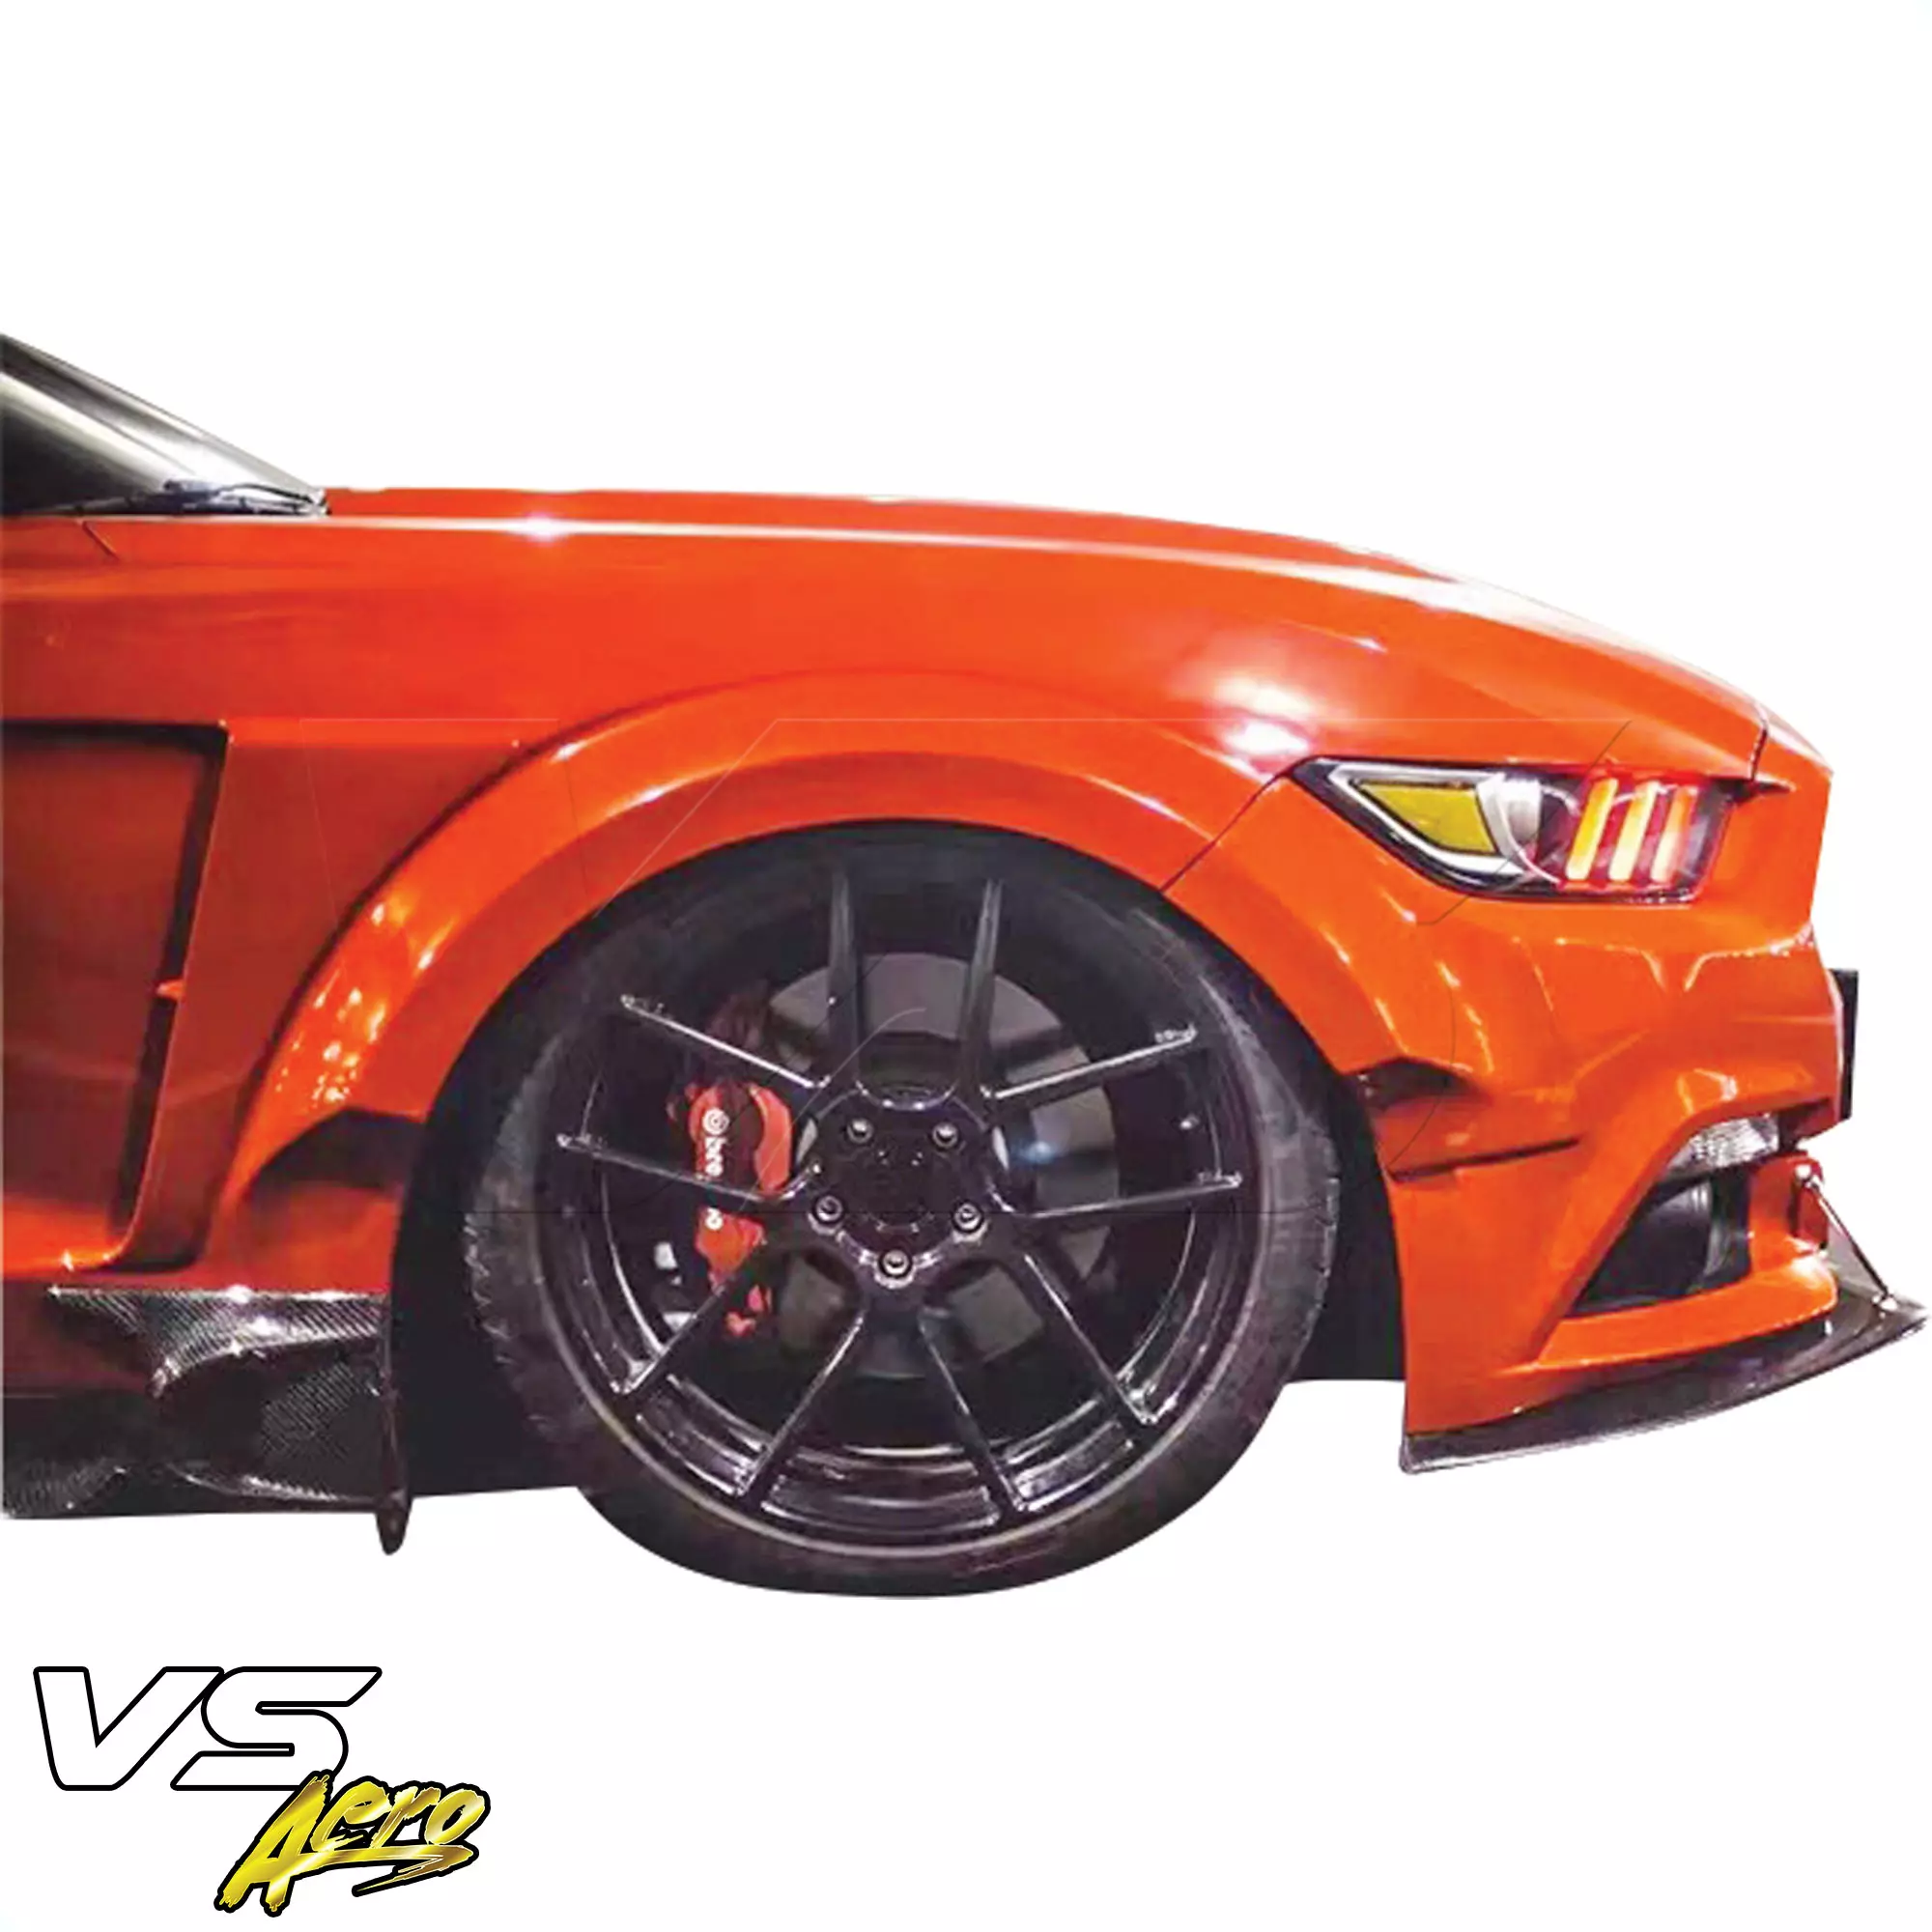 VSaero FRP KTOT Wide Body Fenders (front) > Ford Mustang 2015-2020 - Image 15